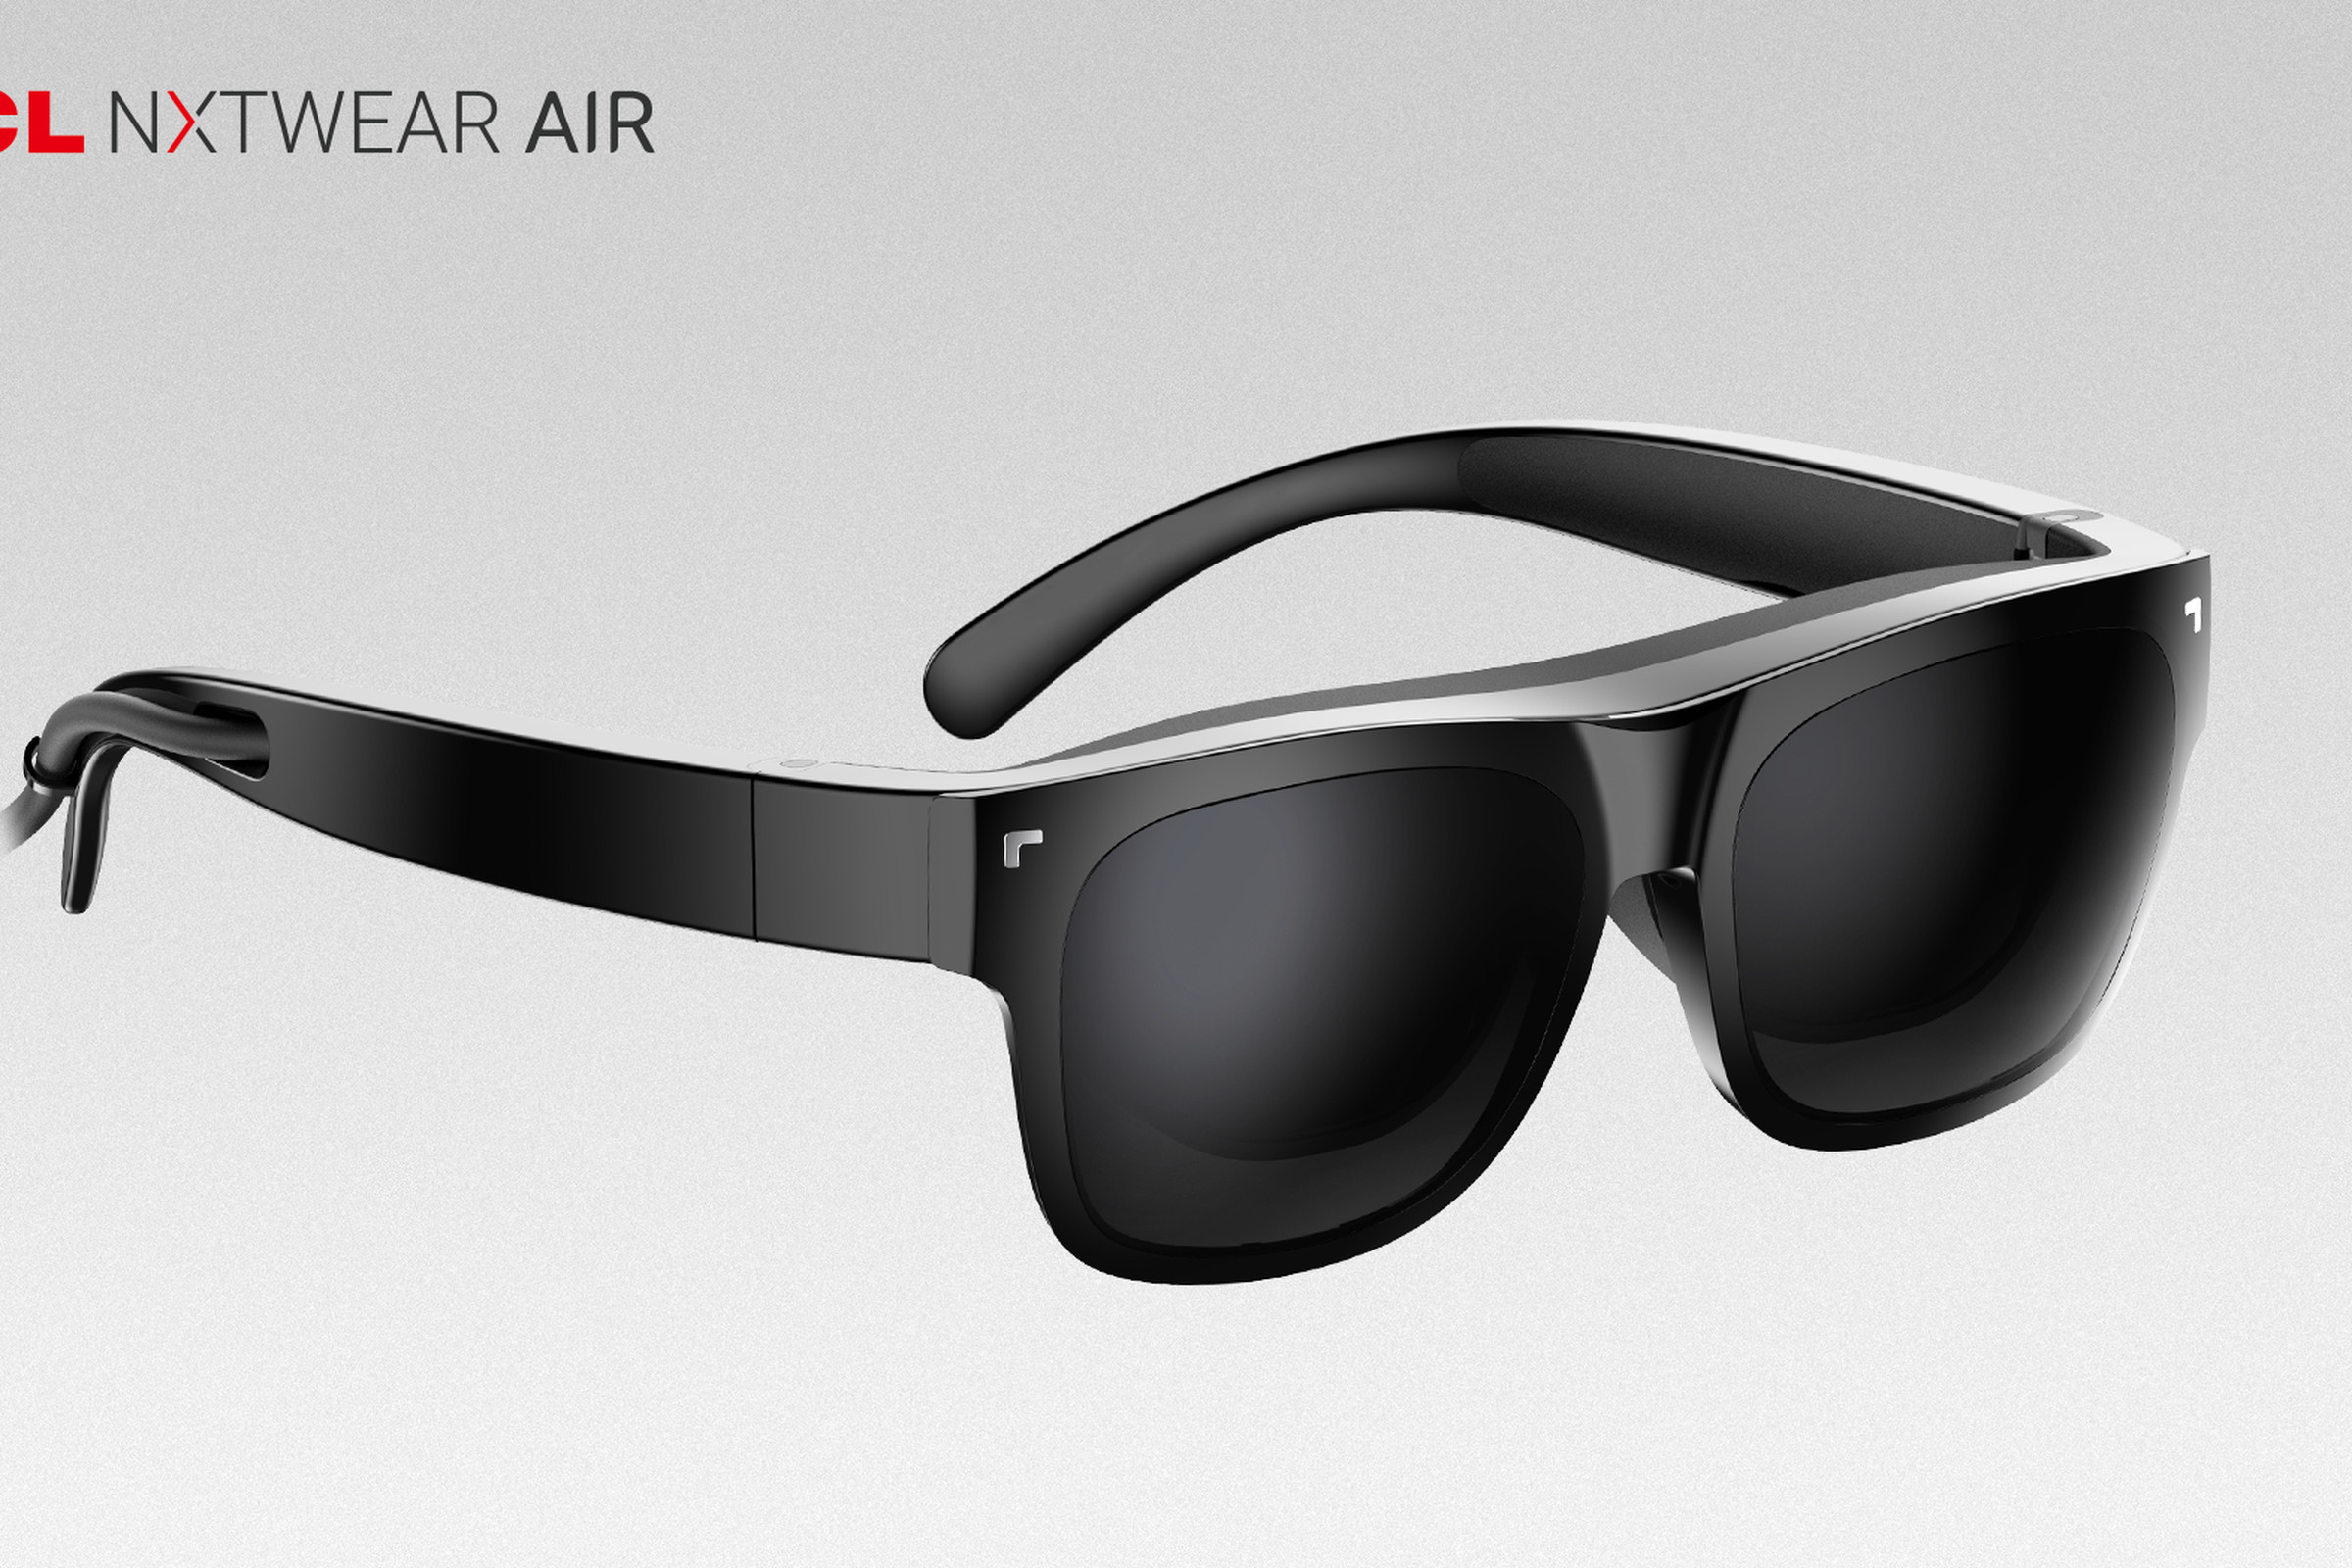 NxtWear Air is a personal secondary display for your phone or laptop embedded in a pair of glasses frames.